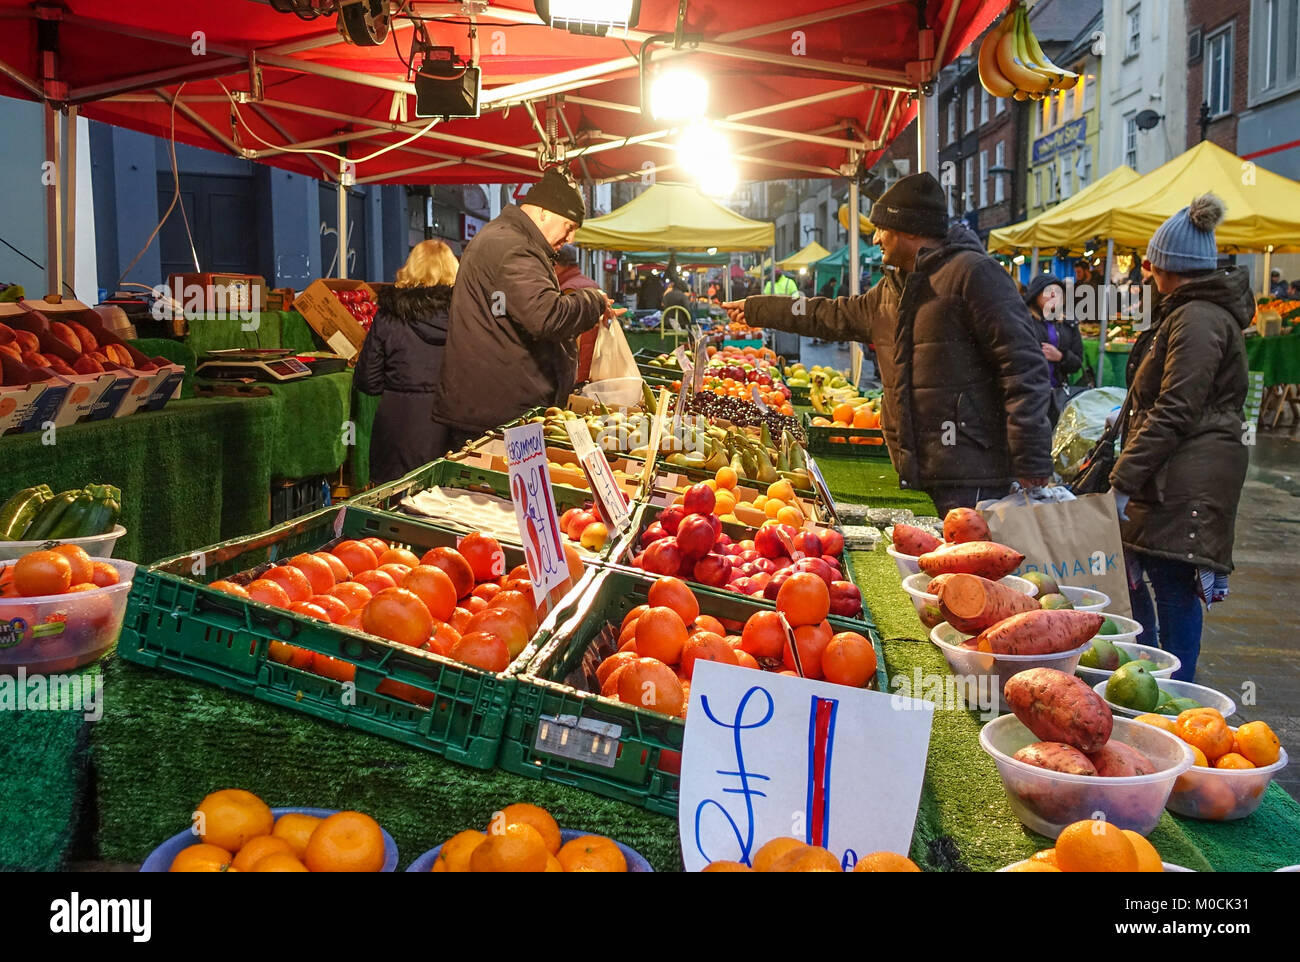 A market stall vendor on a fruit and veg stall makes a sale at Surrey Street market in Croydon, South London. Stock Photo